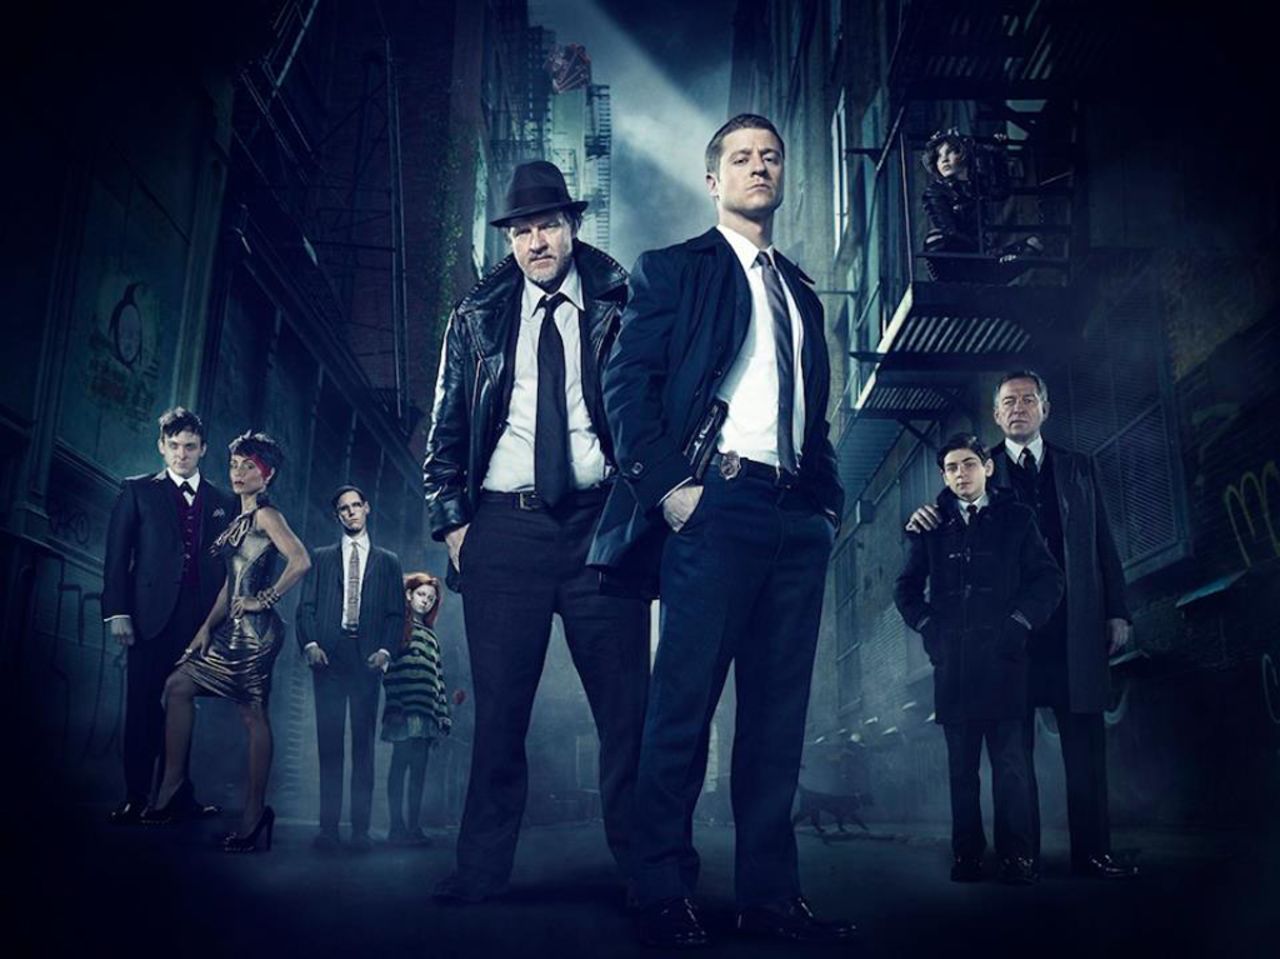 Fox did the "Batman Begins" prequel idea one better with the TV show "Gotham," which begins the night young Bruce Wayne's parents were killed and focuses on Detective Gordon, who faces widespread crime and corruption.